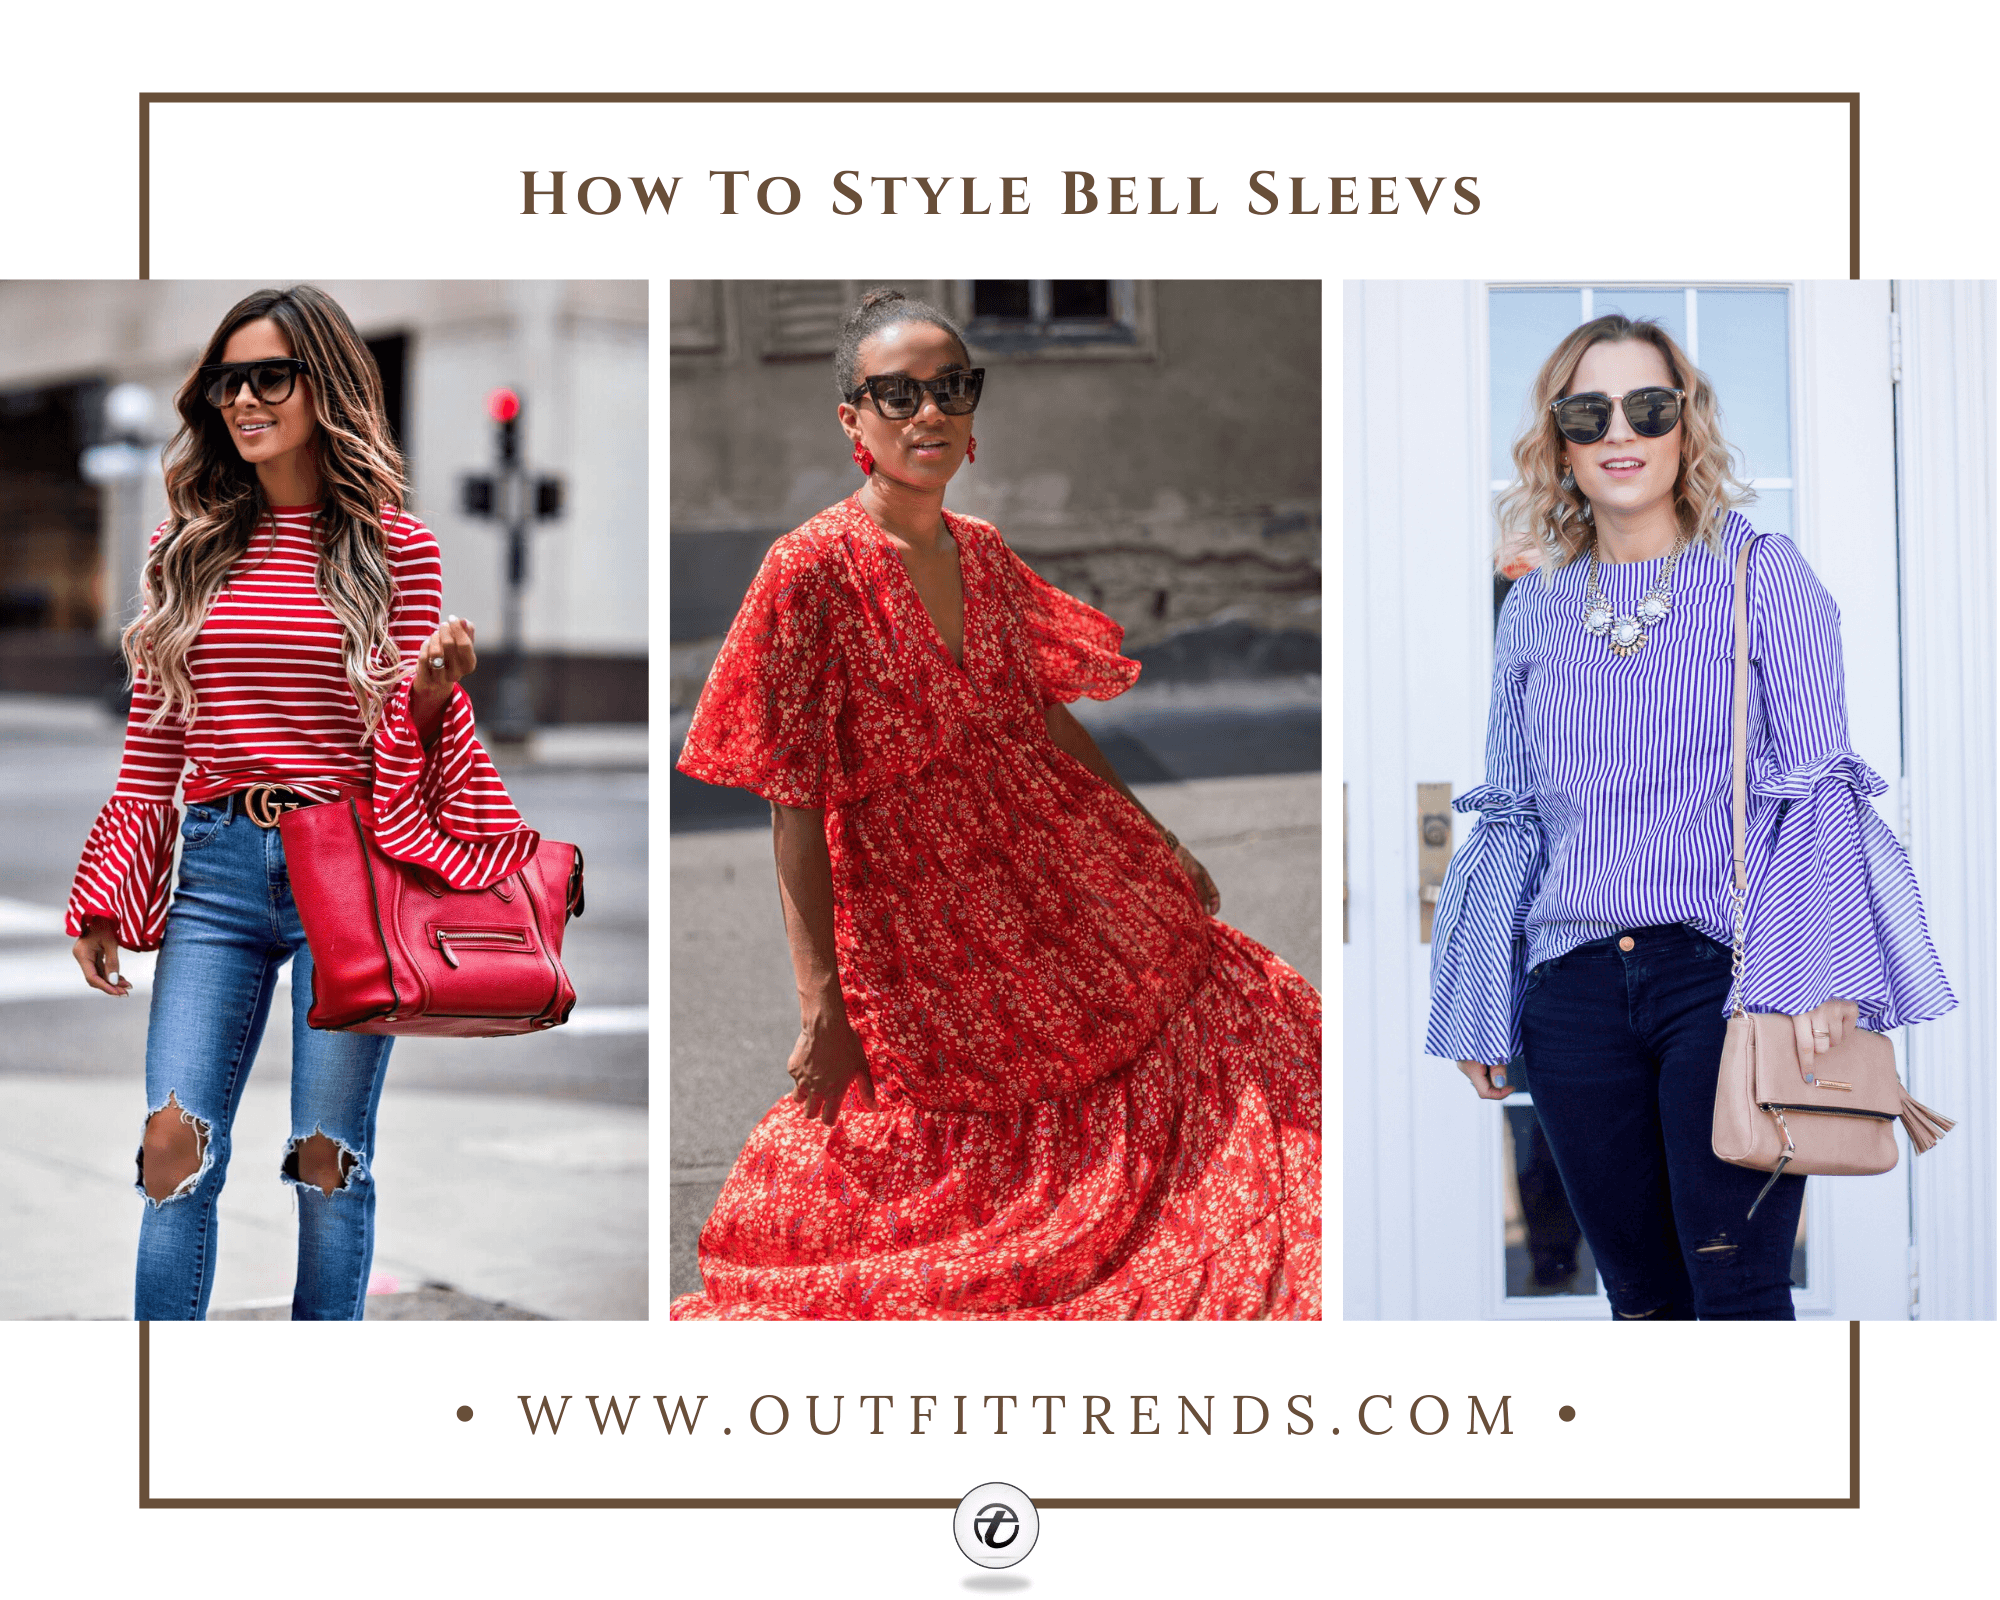 How to Wear Bell Sleeves – 56 Outfit Ideas with Bell Sleeves